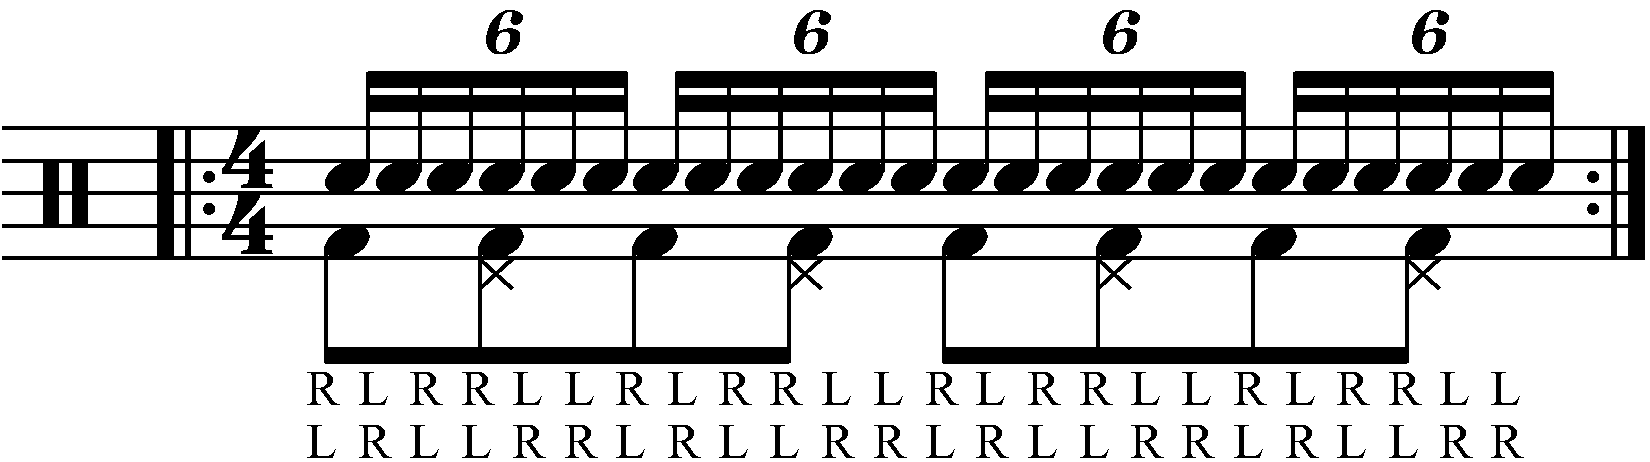 Adding eighth note feet under a paradiddle diddle